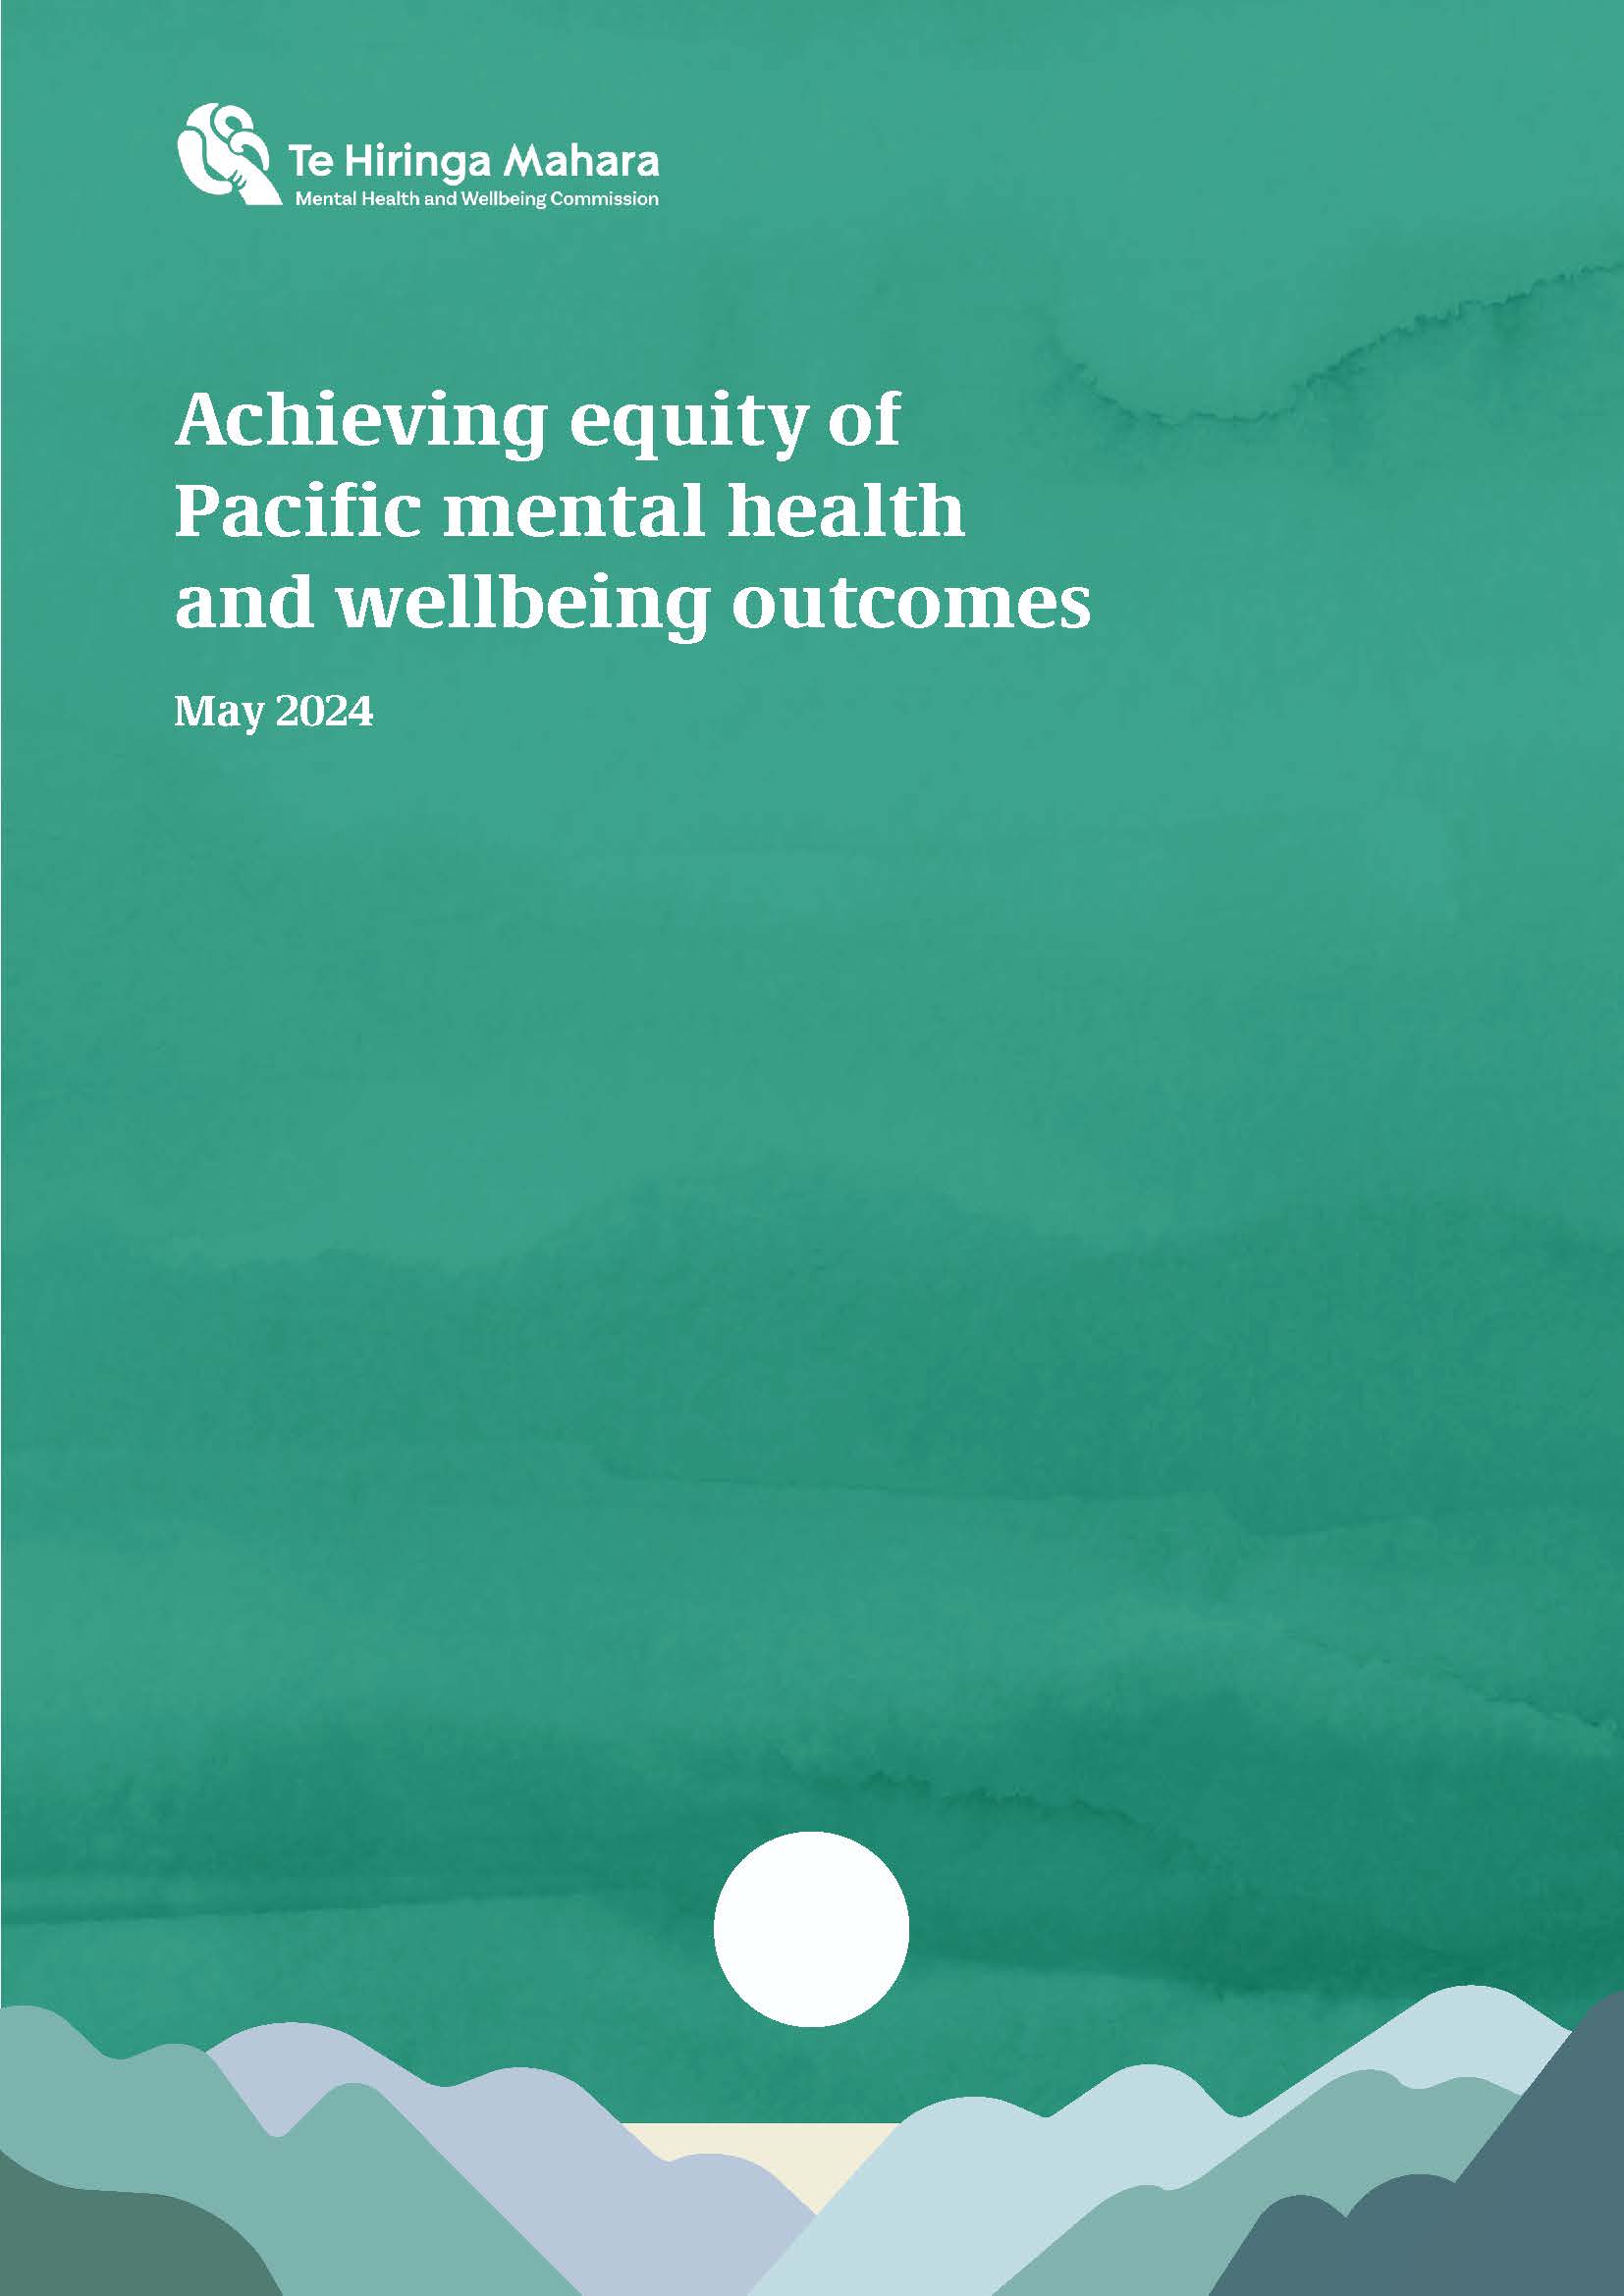 Achieving Pacific wellbeing outcomes report May 2024 cover